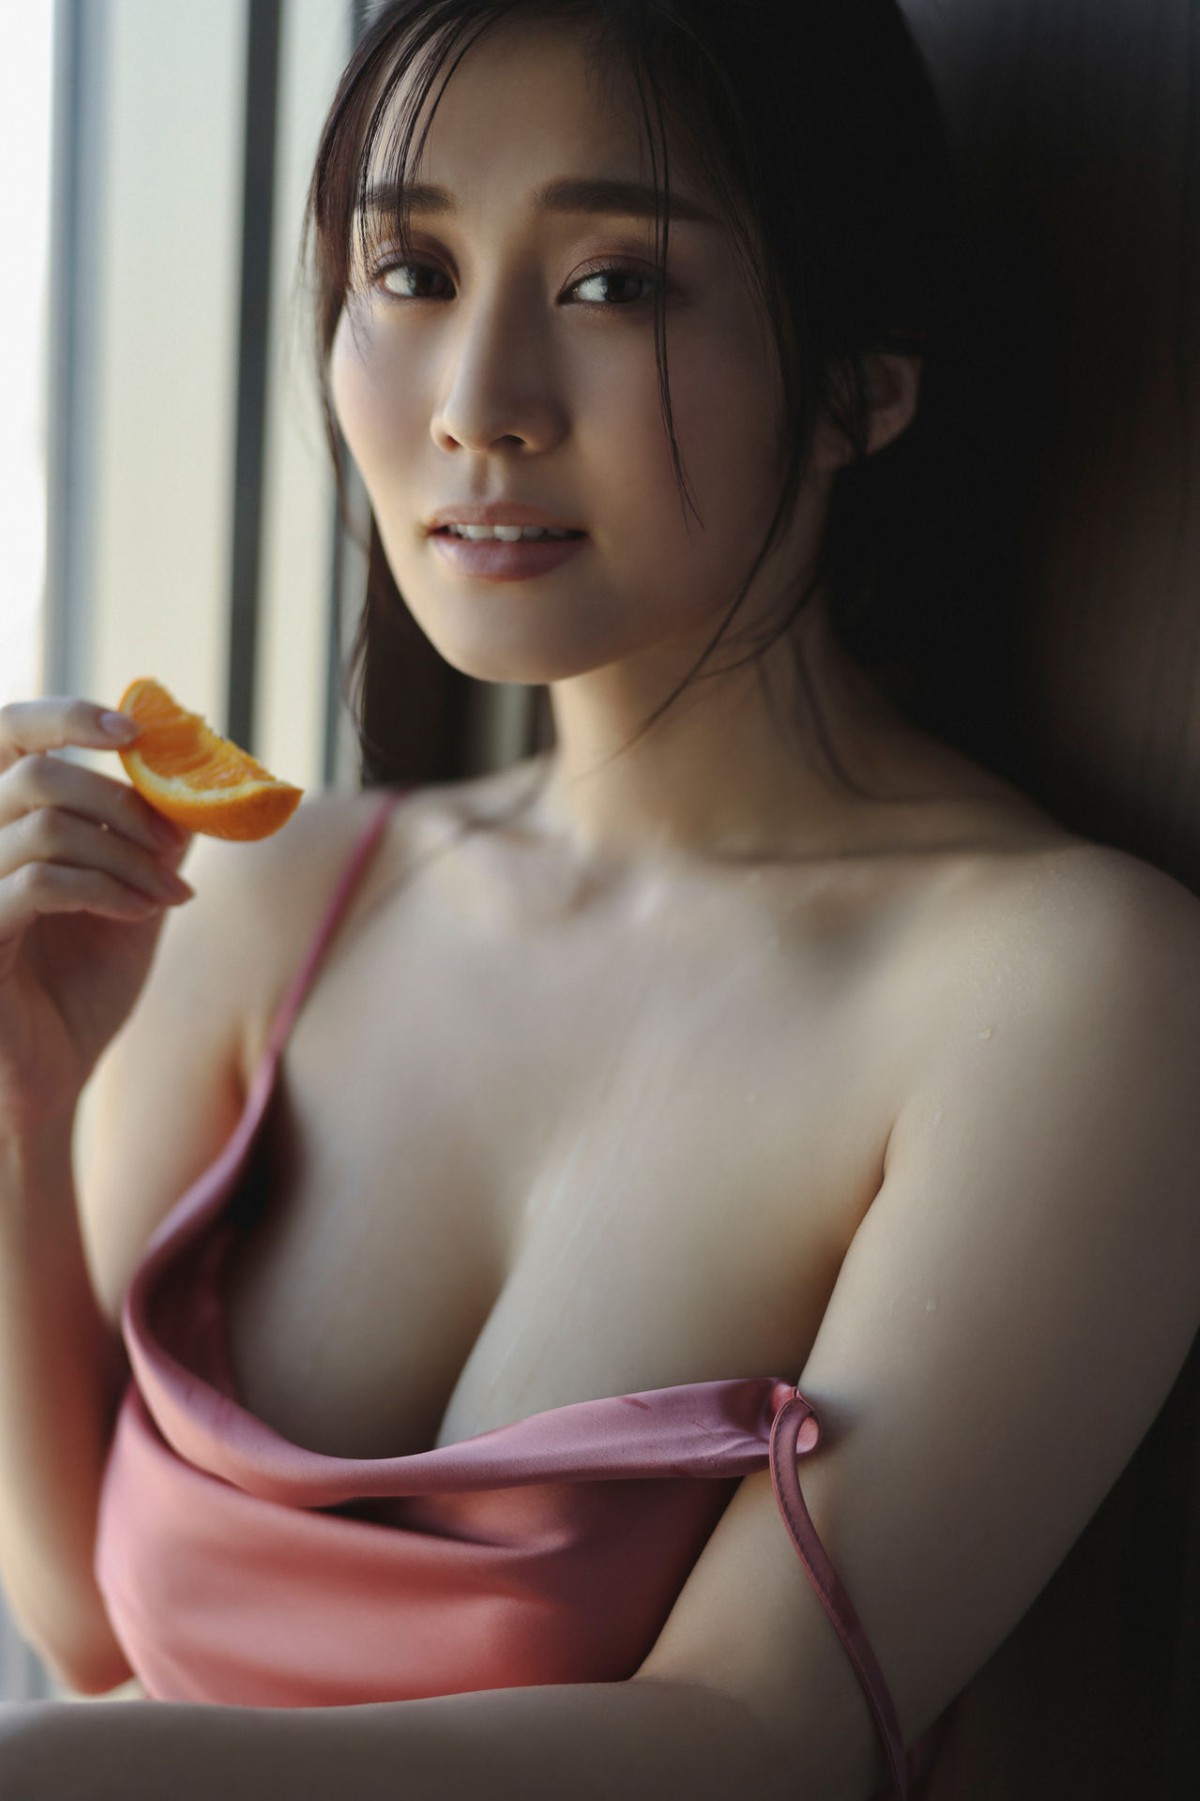 FRIDAY Digital Photobook 2023 02 10 Rin Takahashi 高橋凛 In A Suite Room With An I Cup Beauty Vol 2 0063 4221445506.jpg